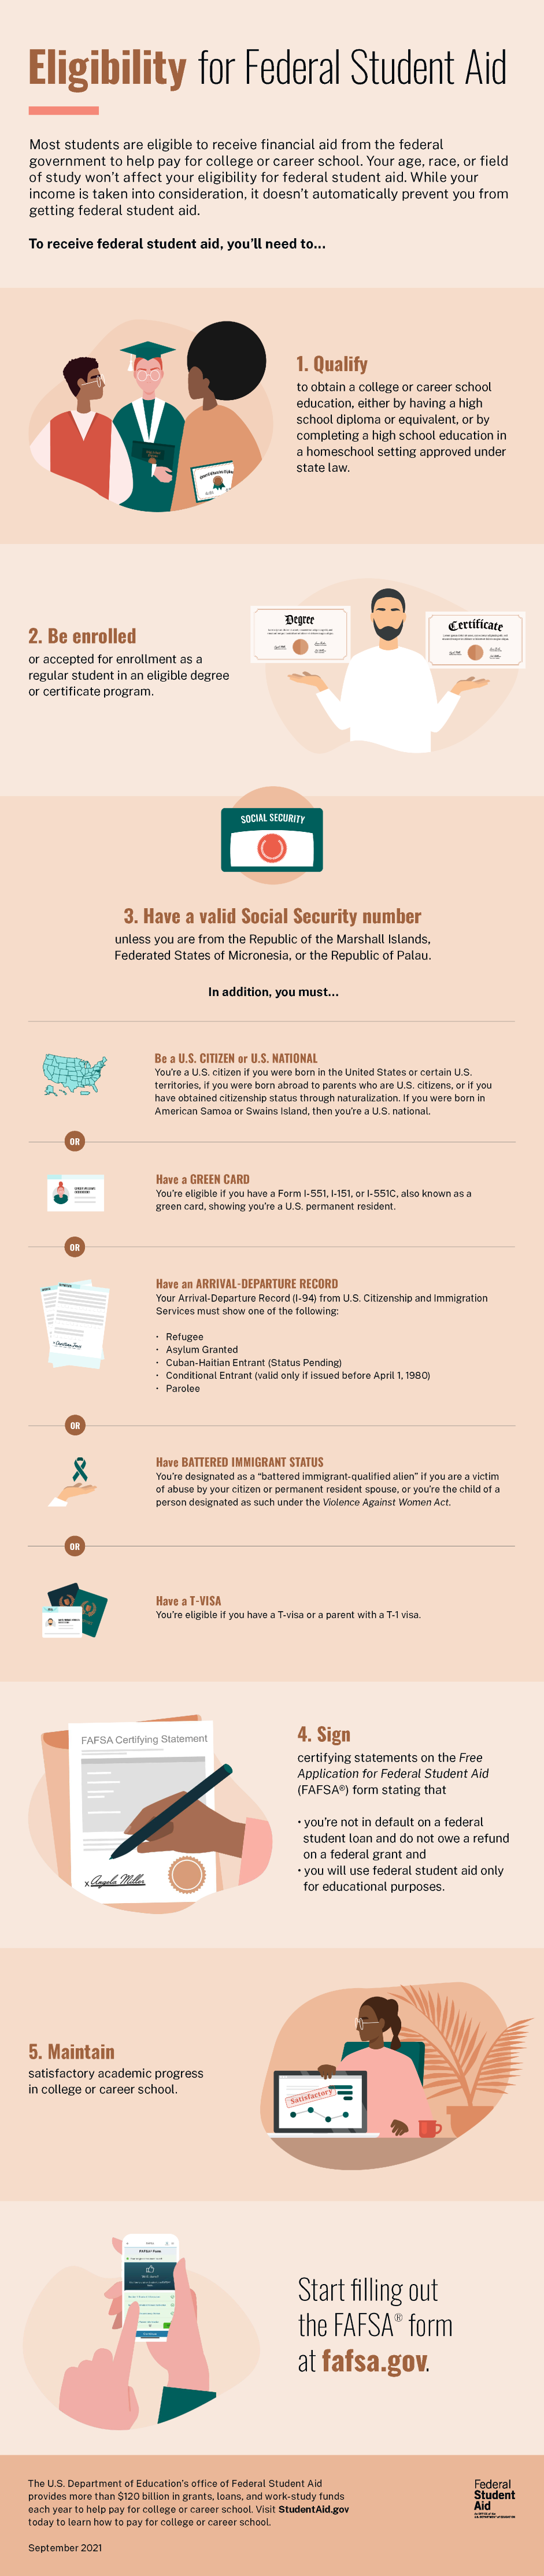 infograph of financial aid eligibility requirements